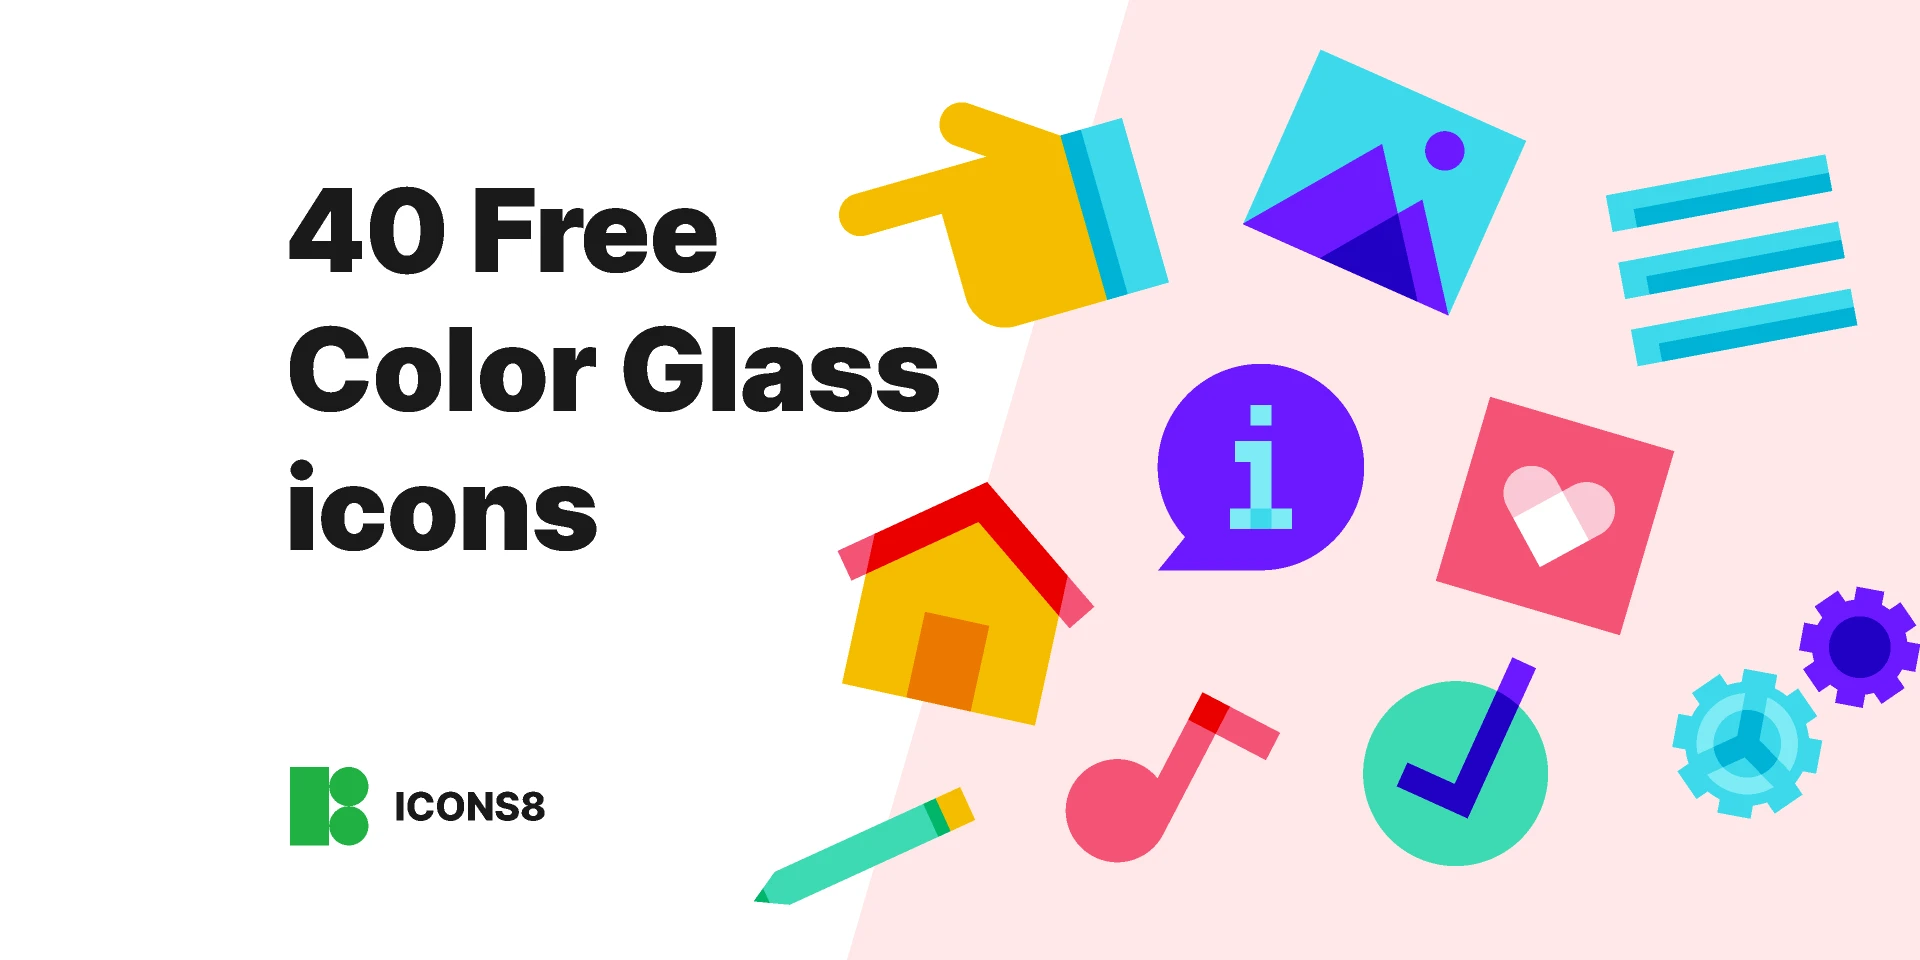 40 Free Color Glass icons for Figma and Adobe XD